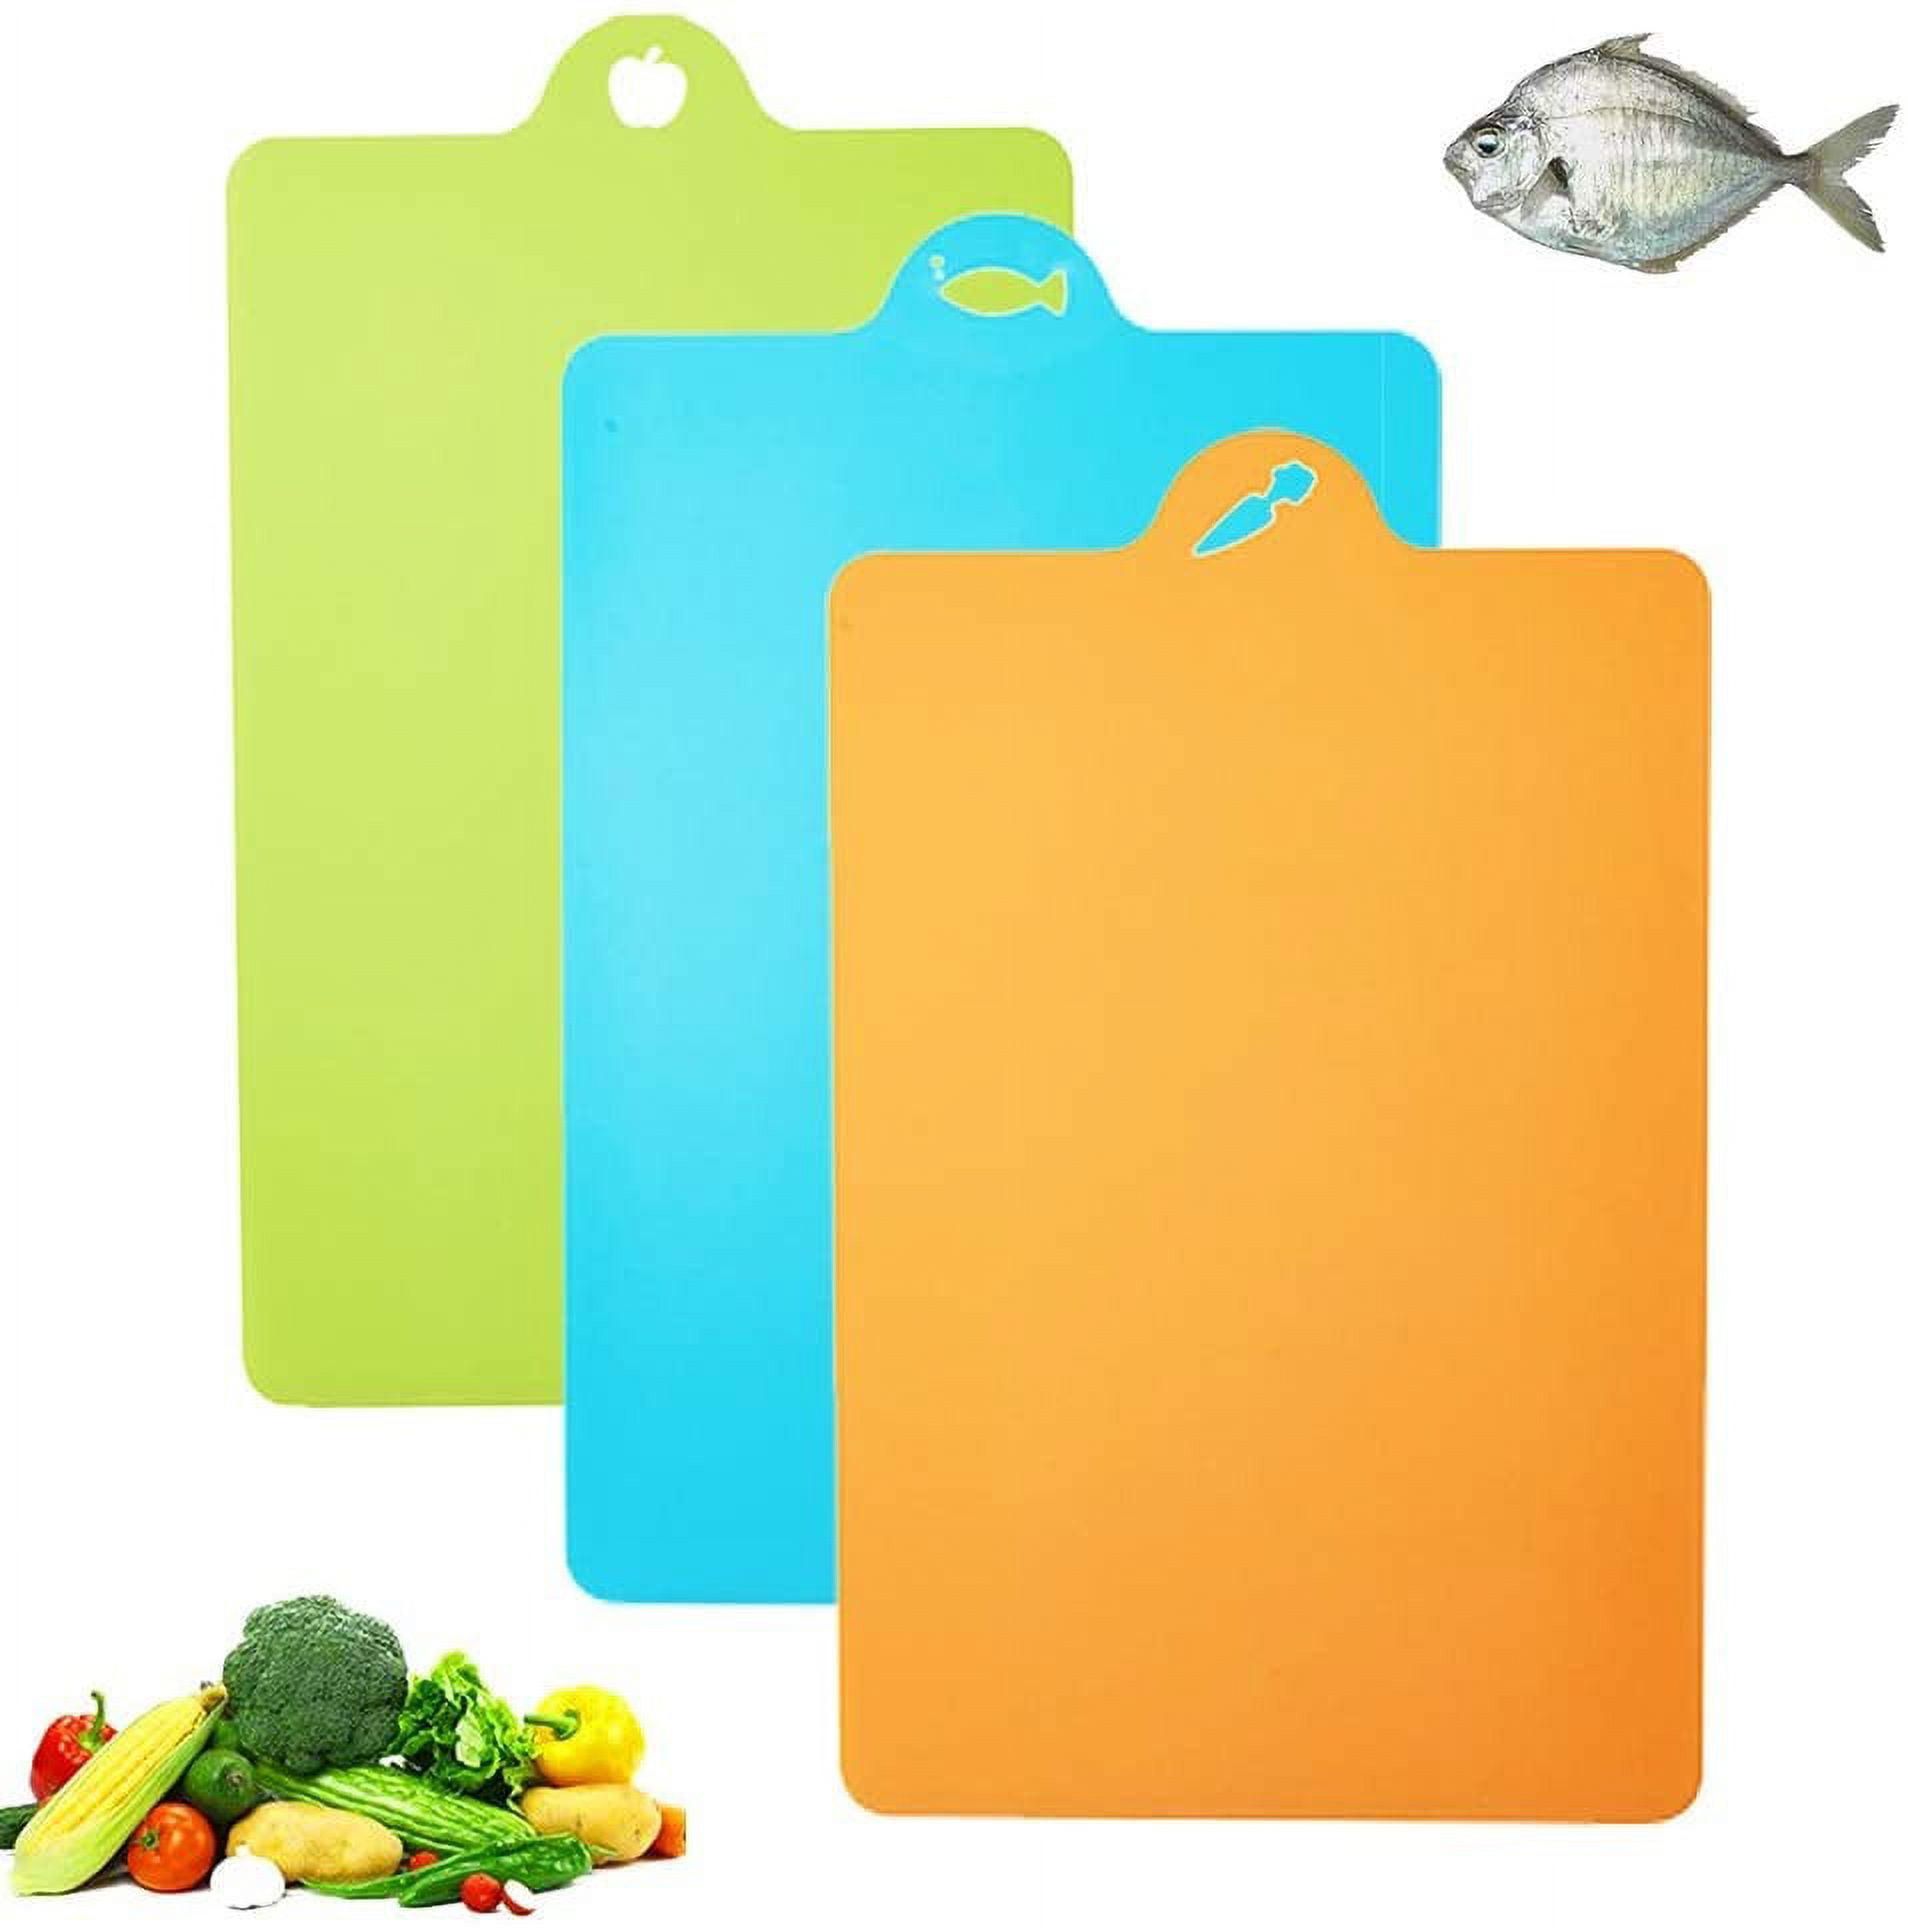 RW Base 24 inch x 18 inch Flexible Cutting Boards, 1 Includes 4 Mats Cutting Mats for Cooking - Dishwasher-Safe, Assorted Colors, Plastic Cutting Boar